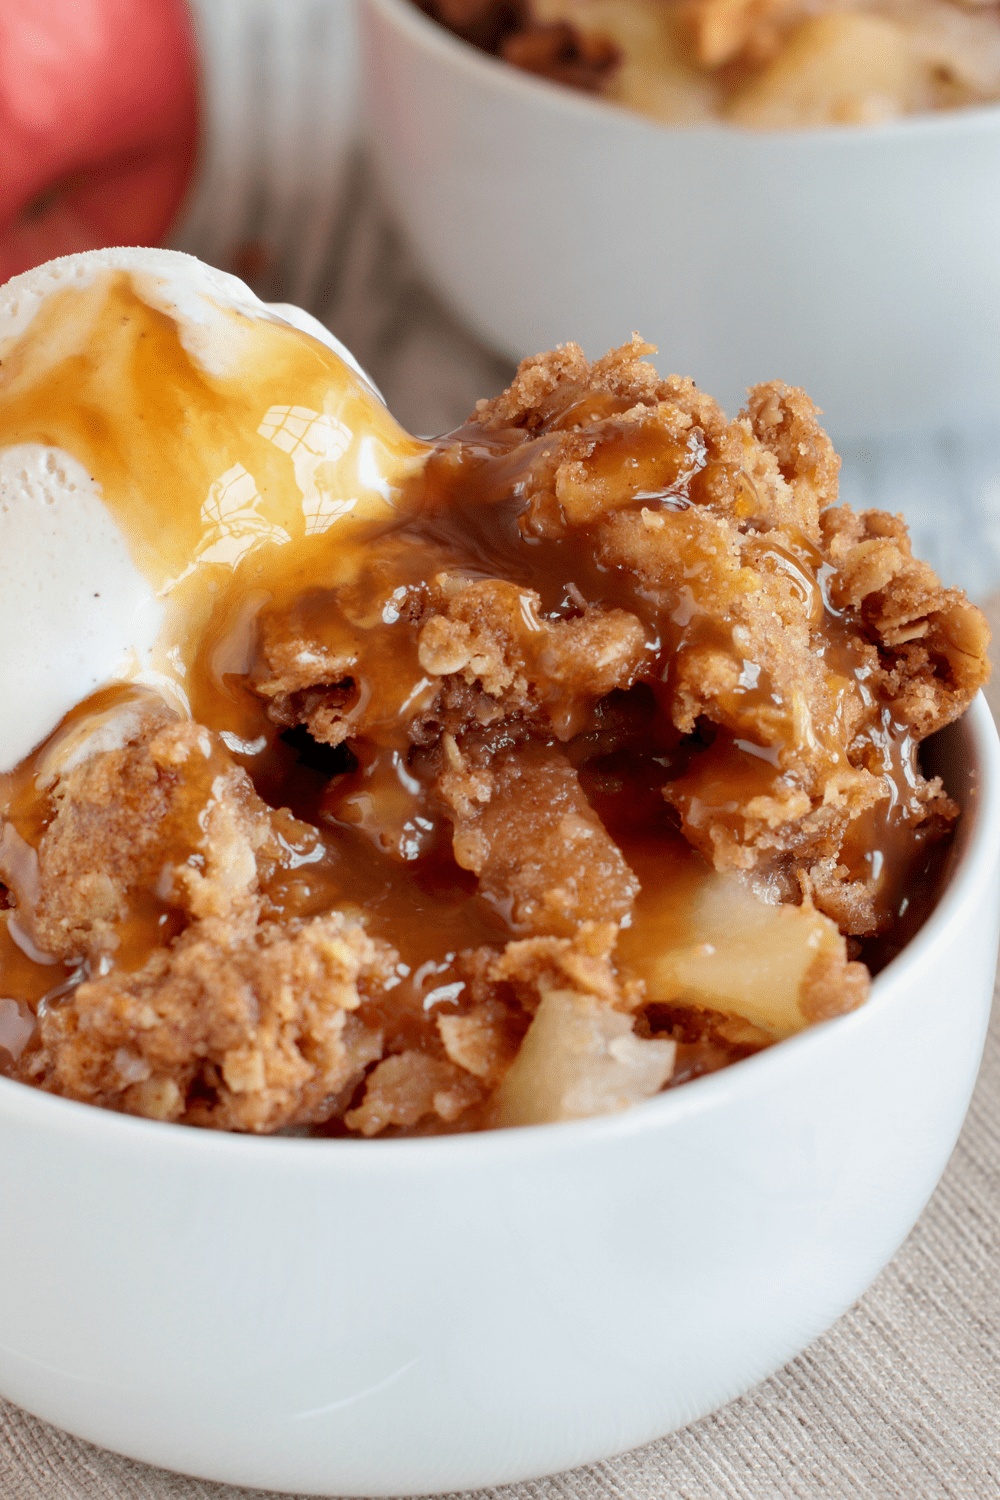 Bowl of Apple Crisp with Ice Cream and Caramel Syrup